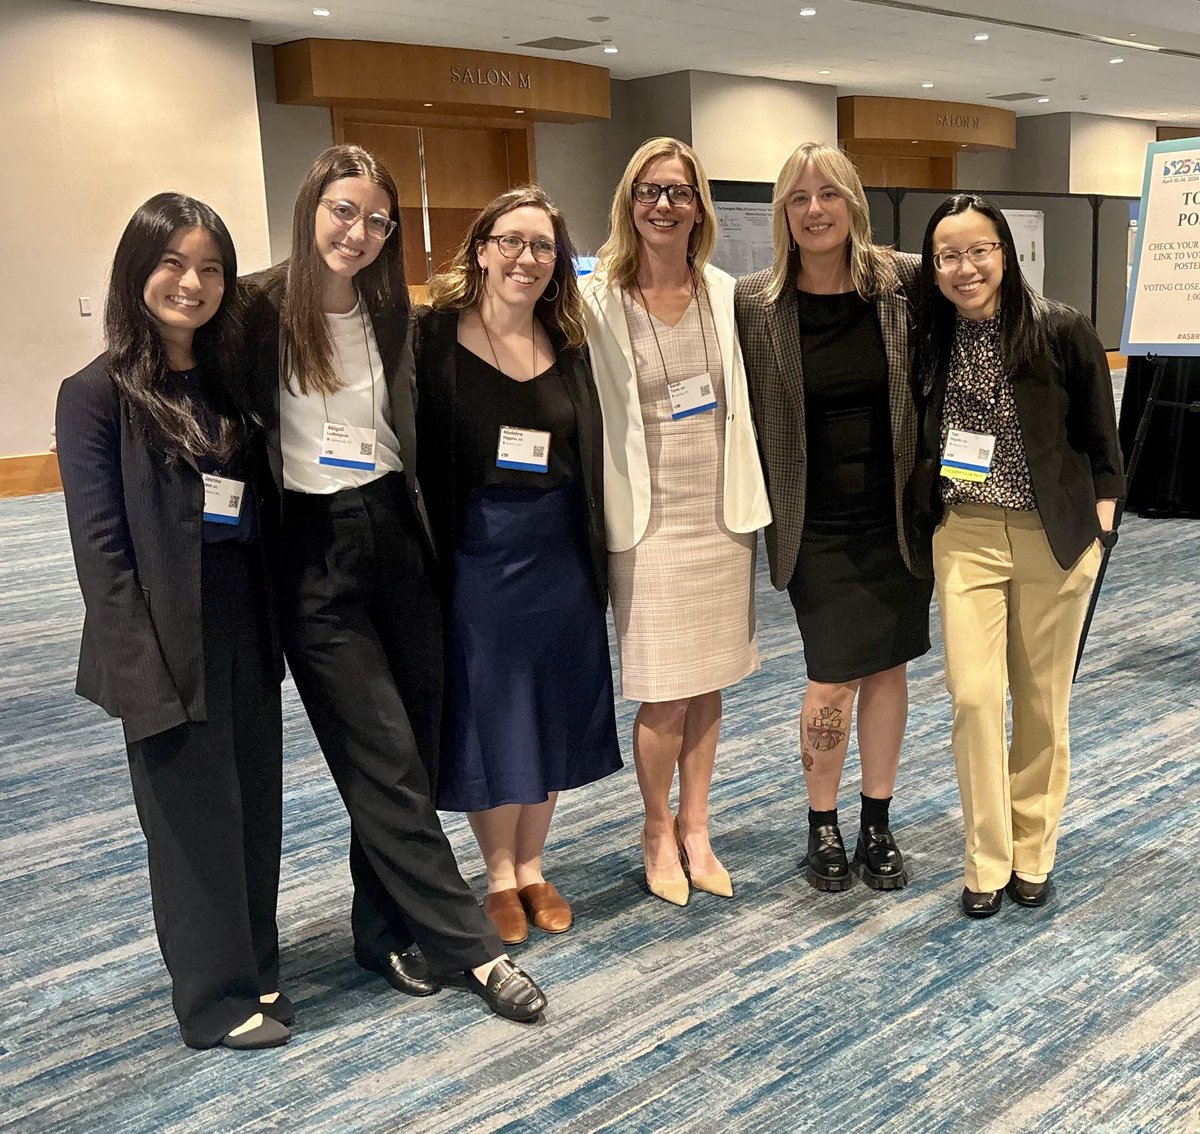 Learned so much at ⁦the ⁦@ASBrS⁩ meeting this year! And excited to share the experience with a phenomenal research team! ⁦@CUDeptSurg⁩ ⁦@CUSurgOnc⁩ ⁦@MadelineHuey⁩ ⁦@THuynhMD⁩